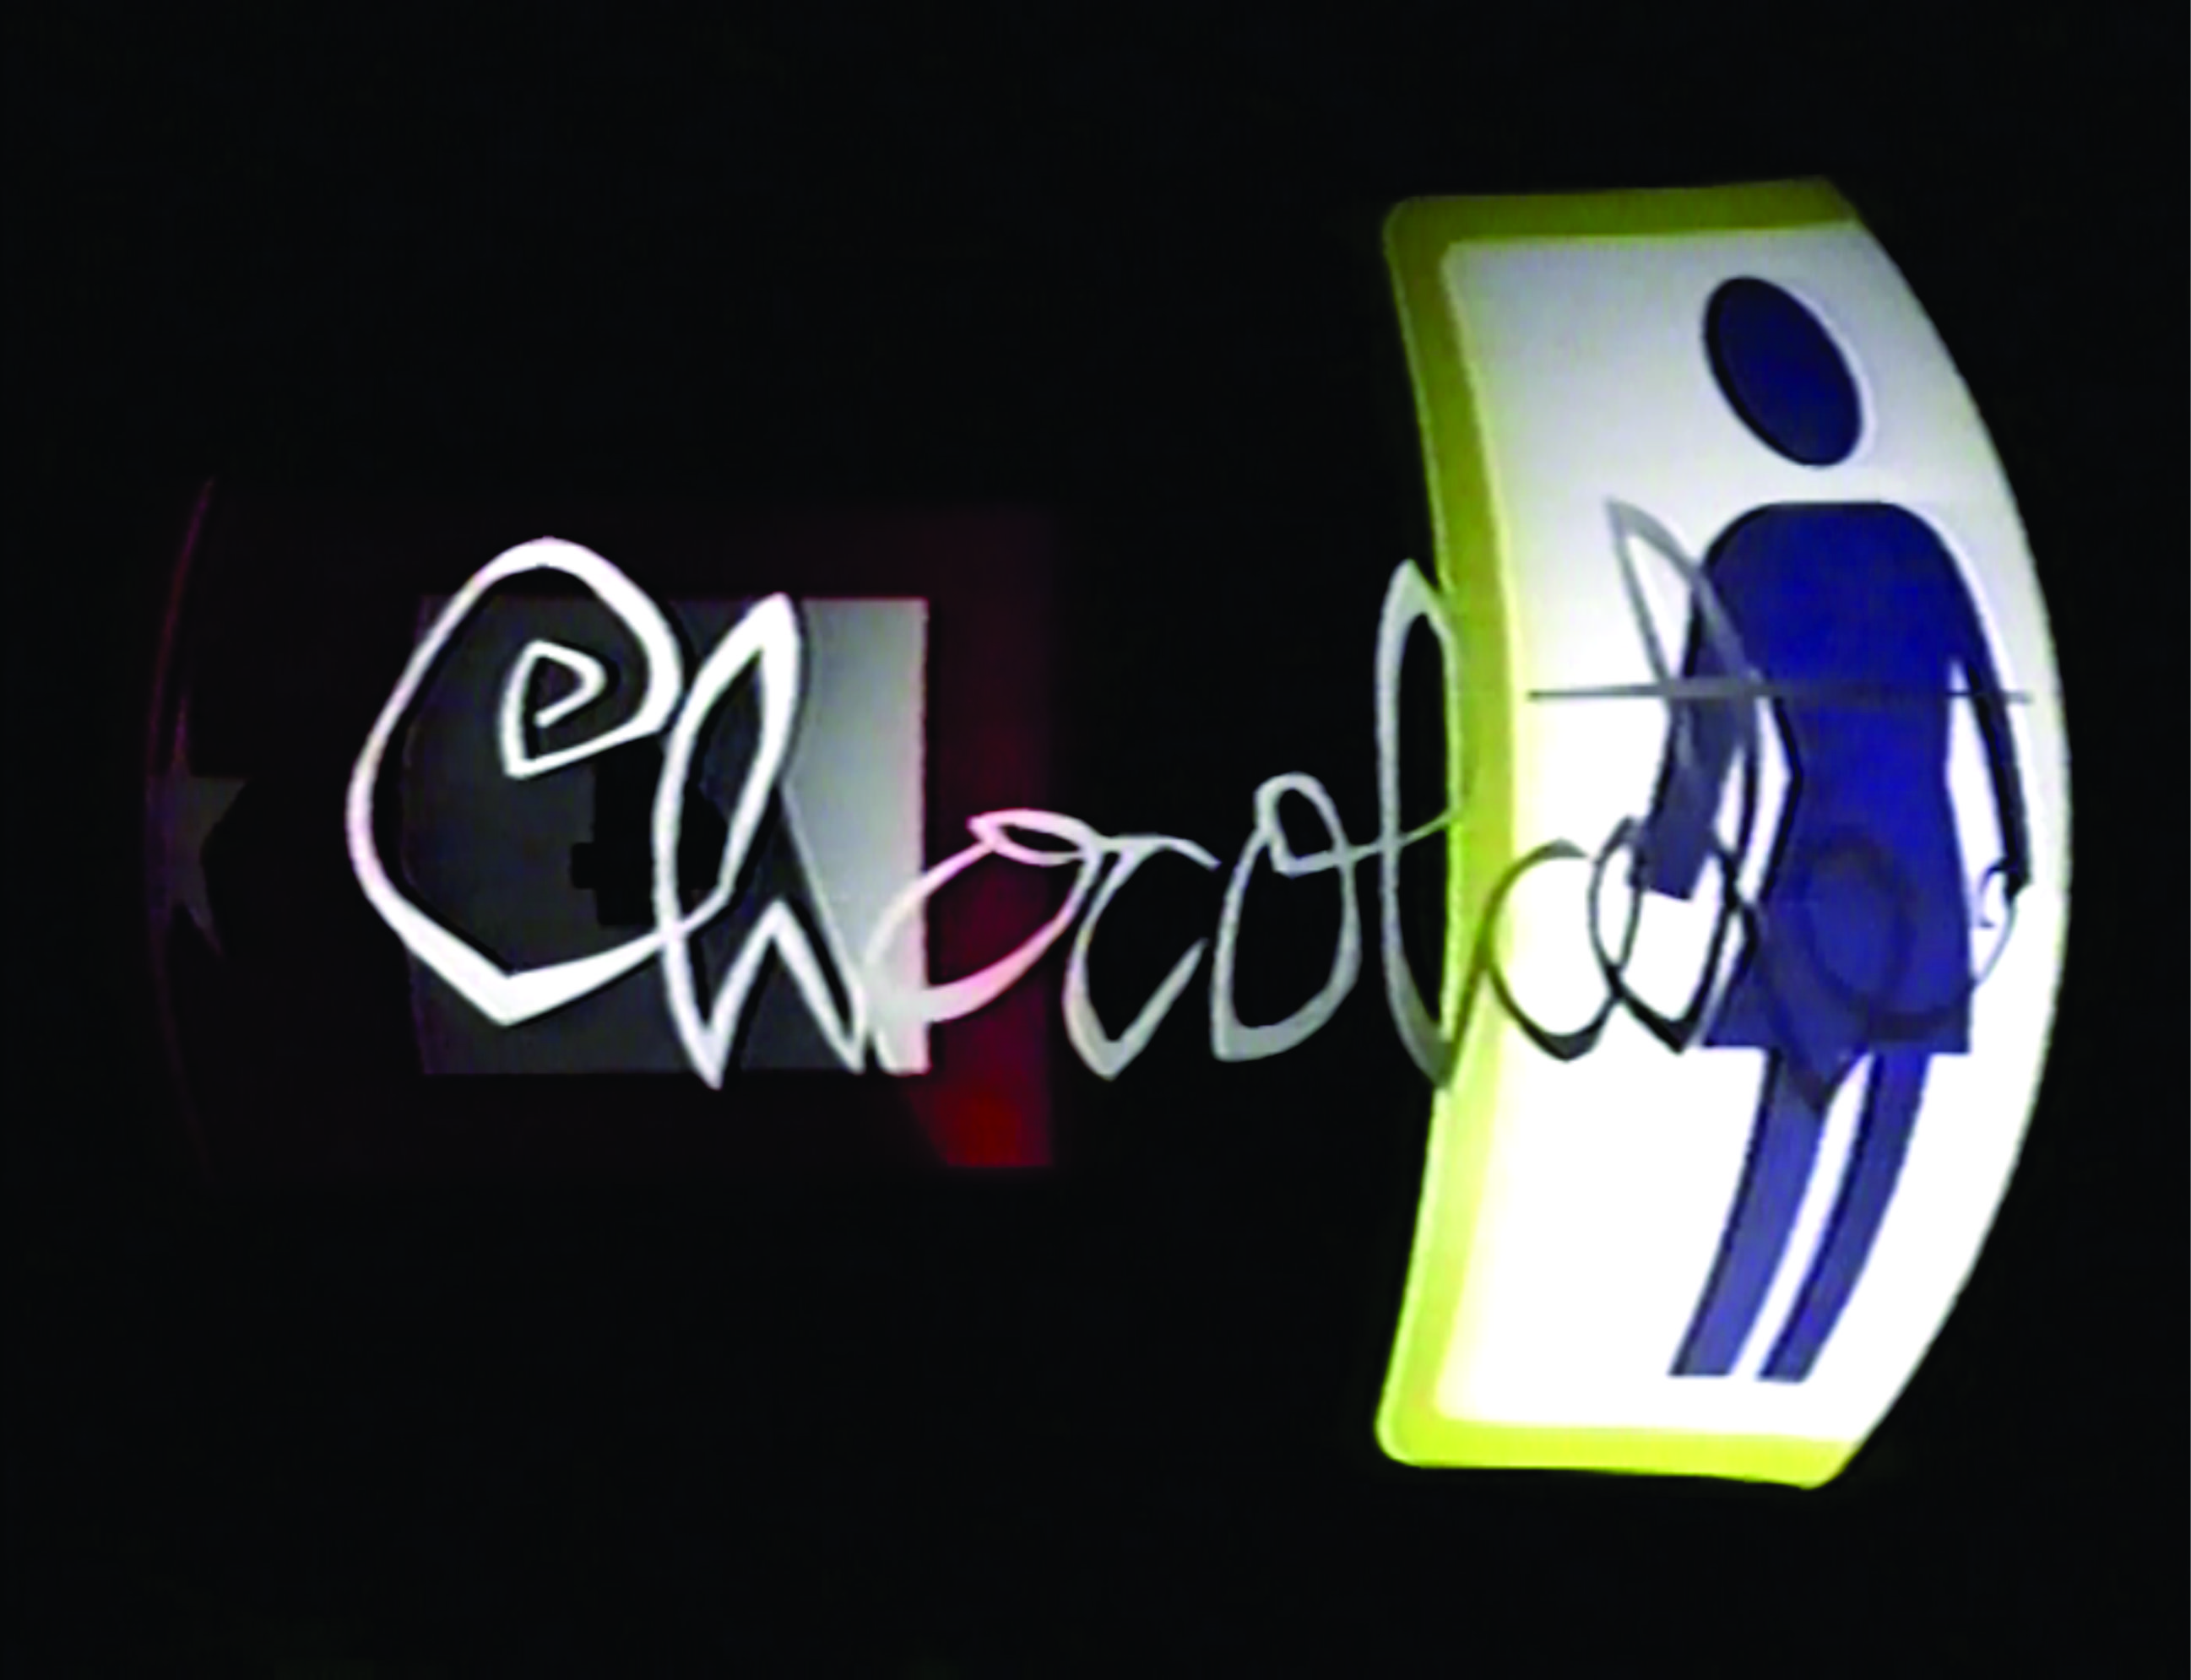 Chocolate - A Limited Edition Preview Of The New Full-Length Production. feature image